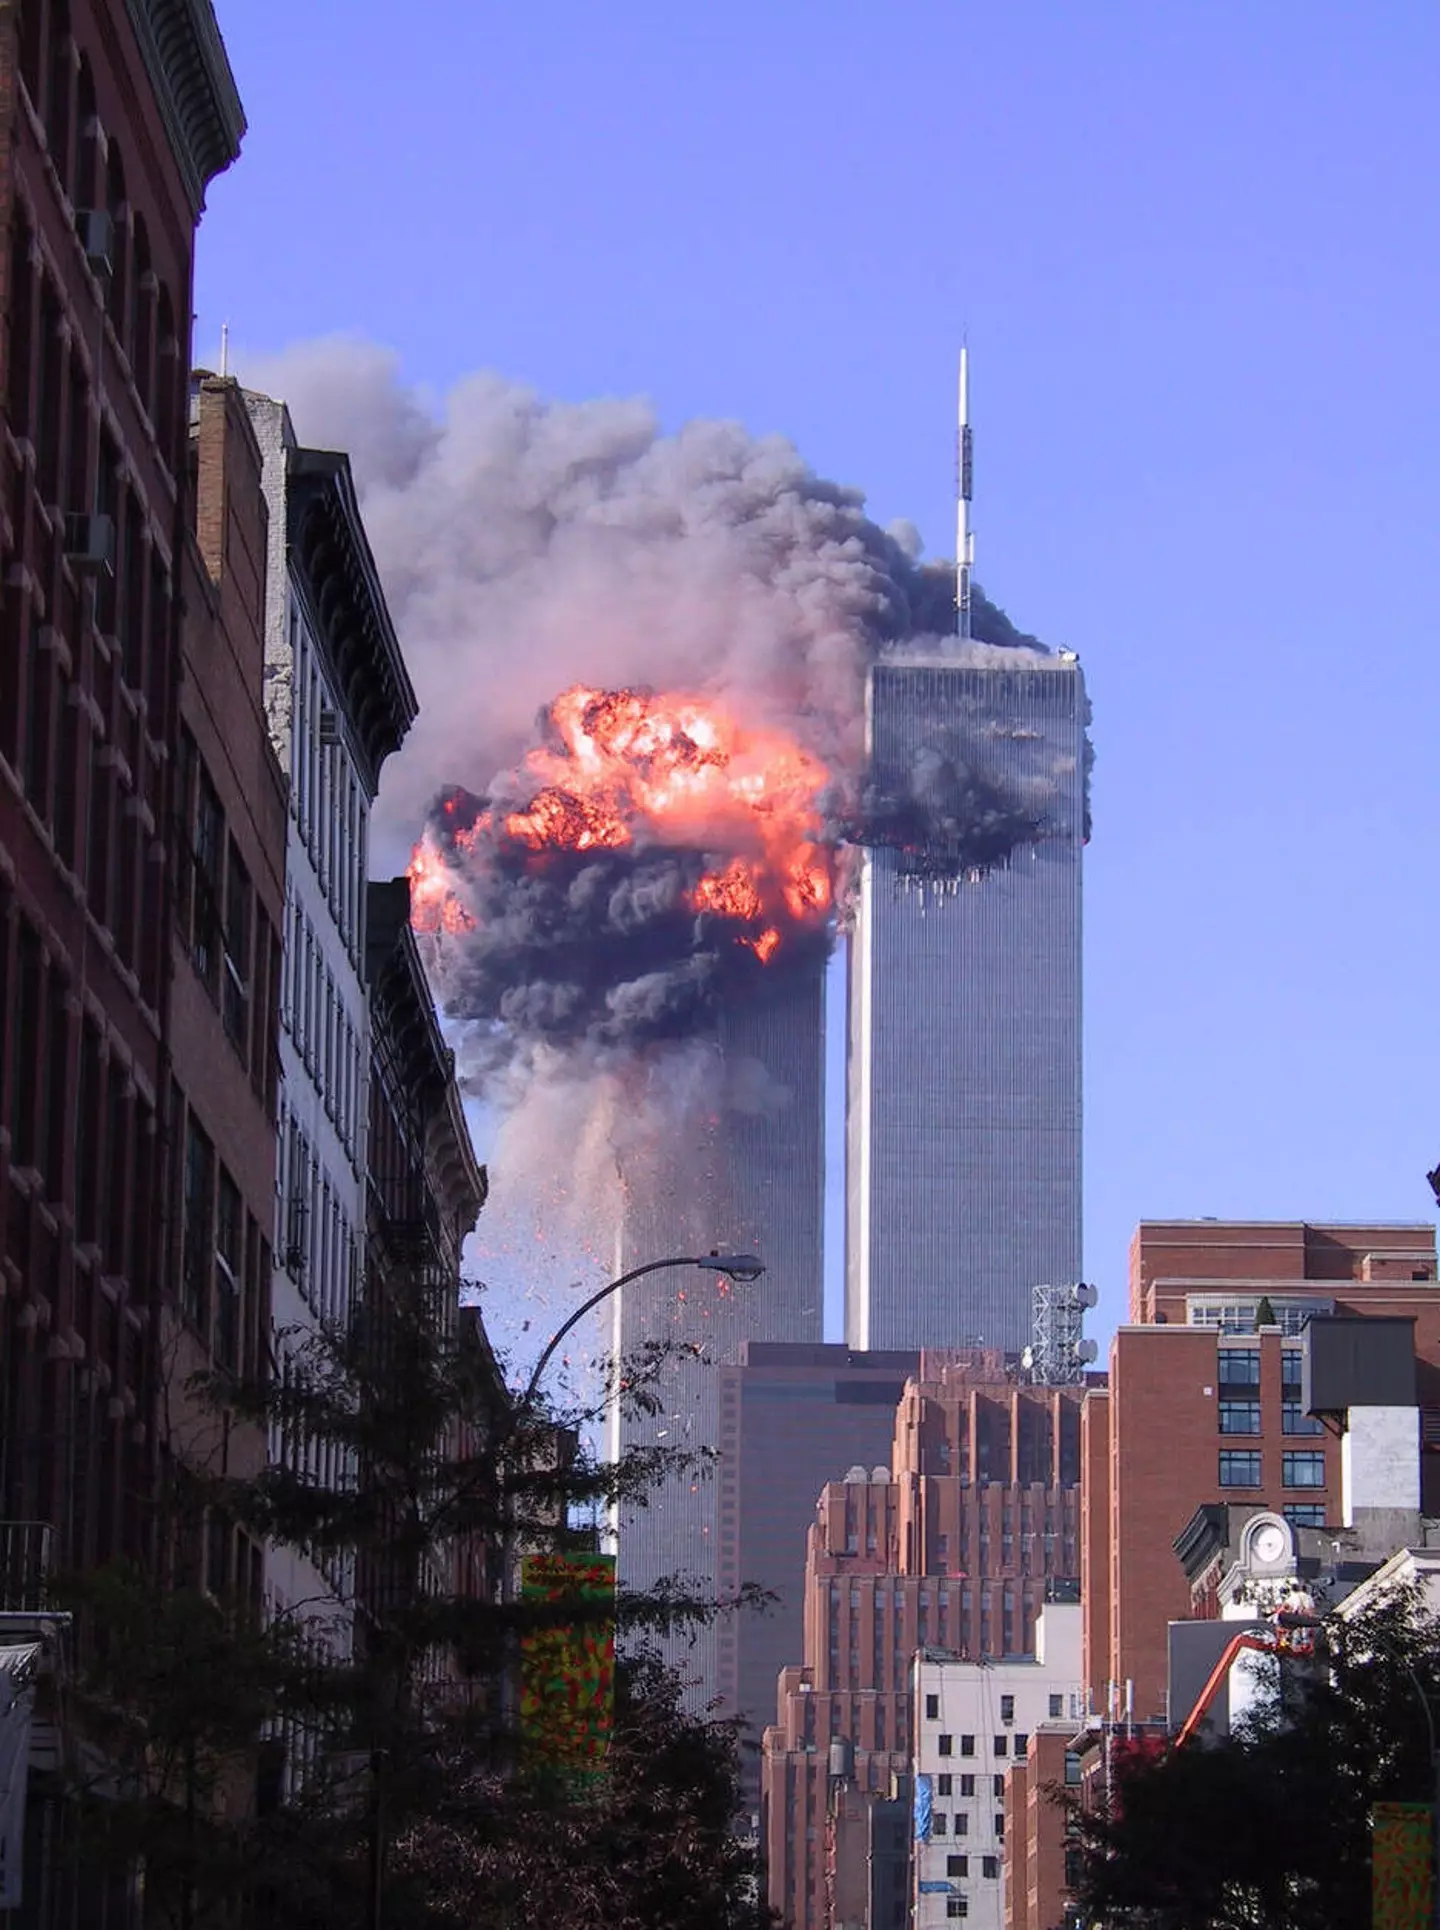 Flight 11 crashed into the south tower.